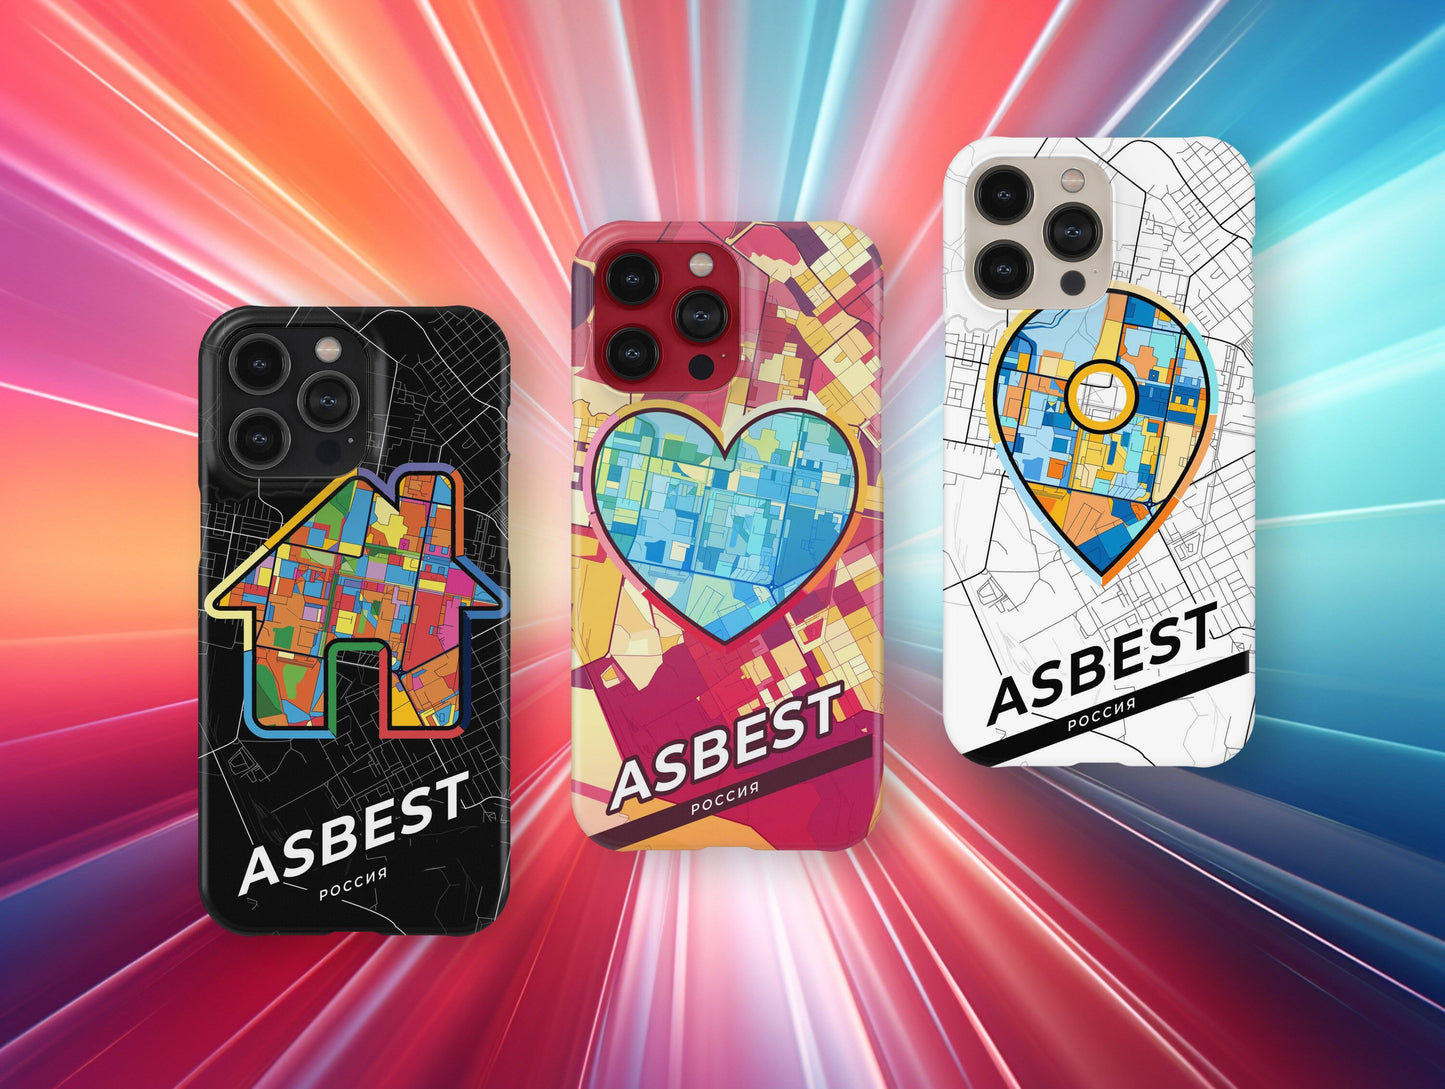 Asbest Russia slim phone case with colorful icon. Birthday, wedding or housewarming gift. Couple match cases.